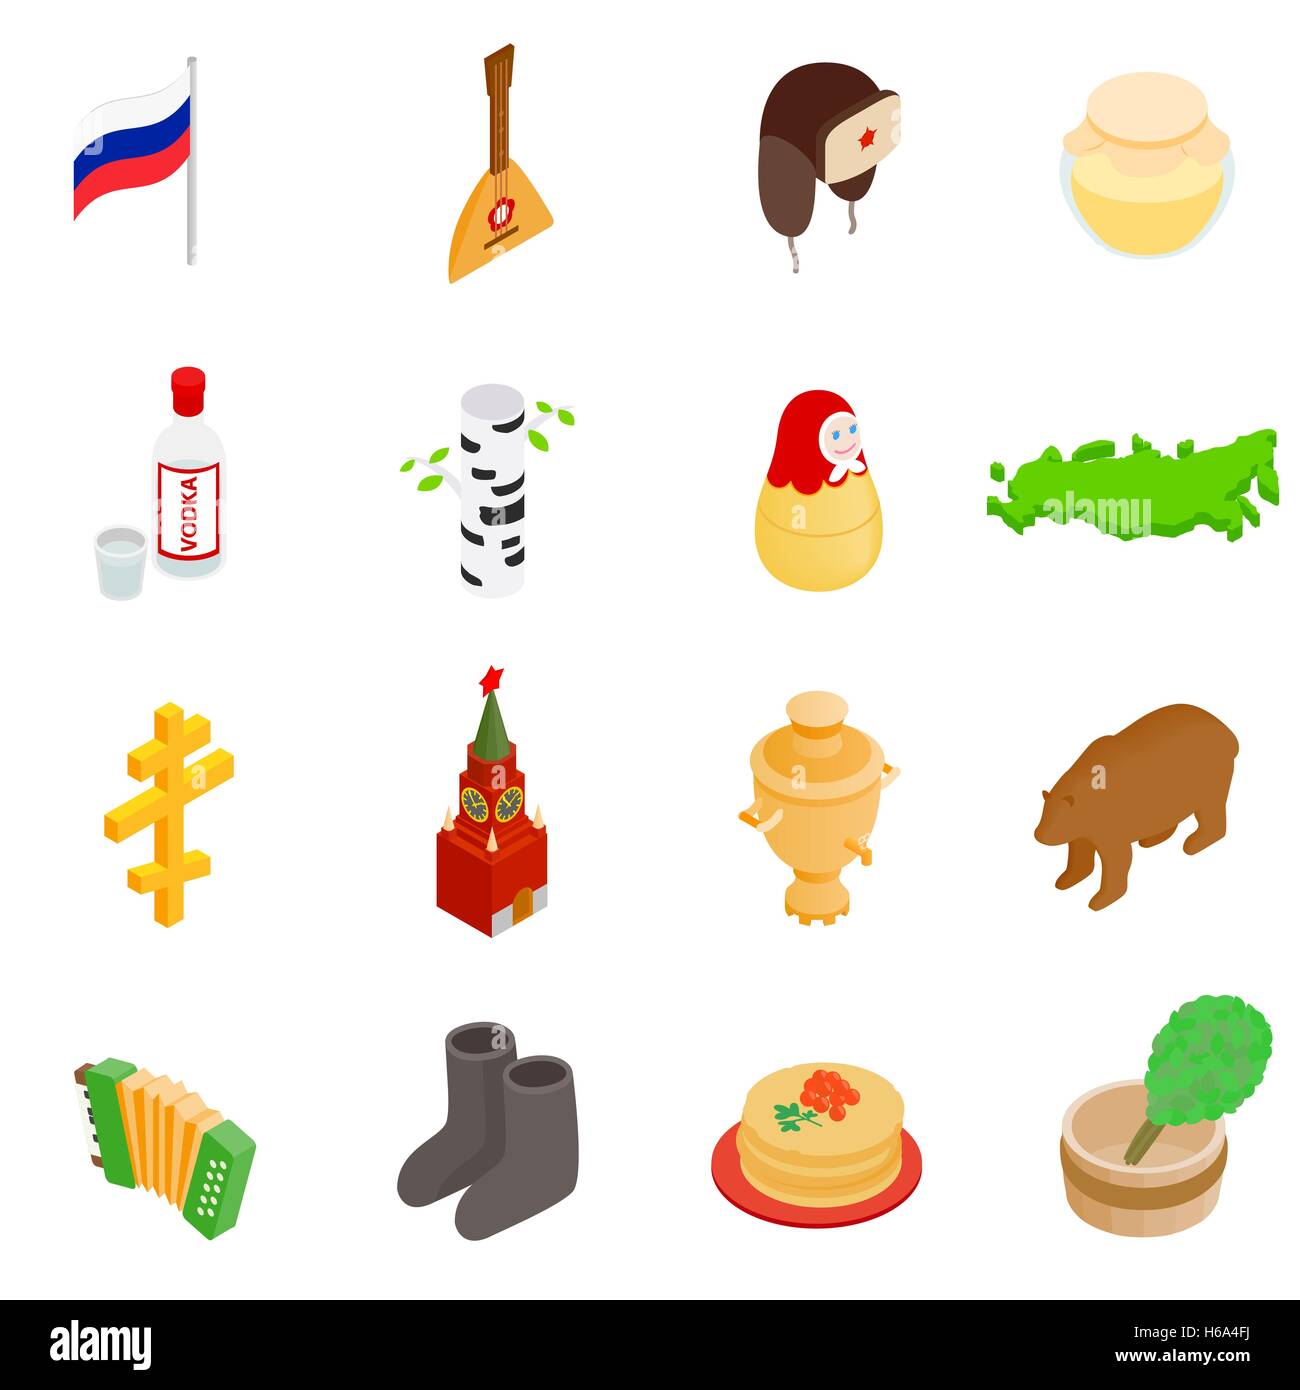 Russia isometric 3d icons Stock Vector